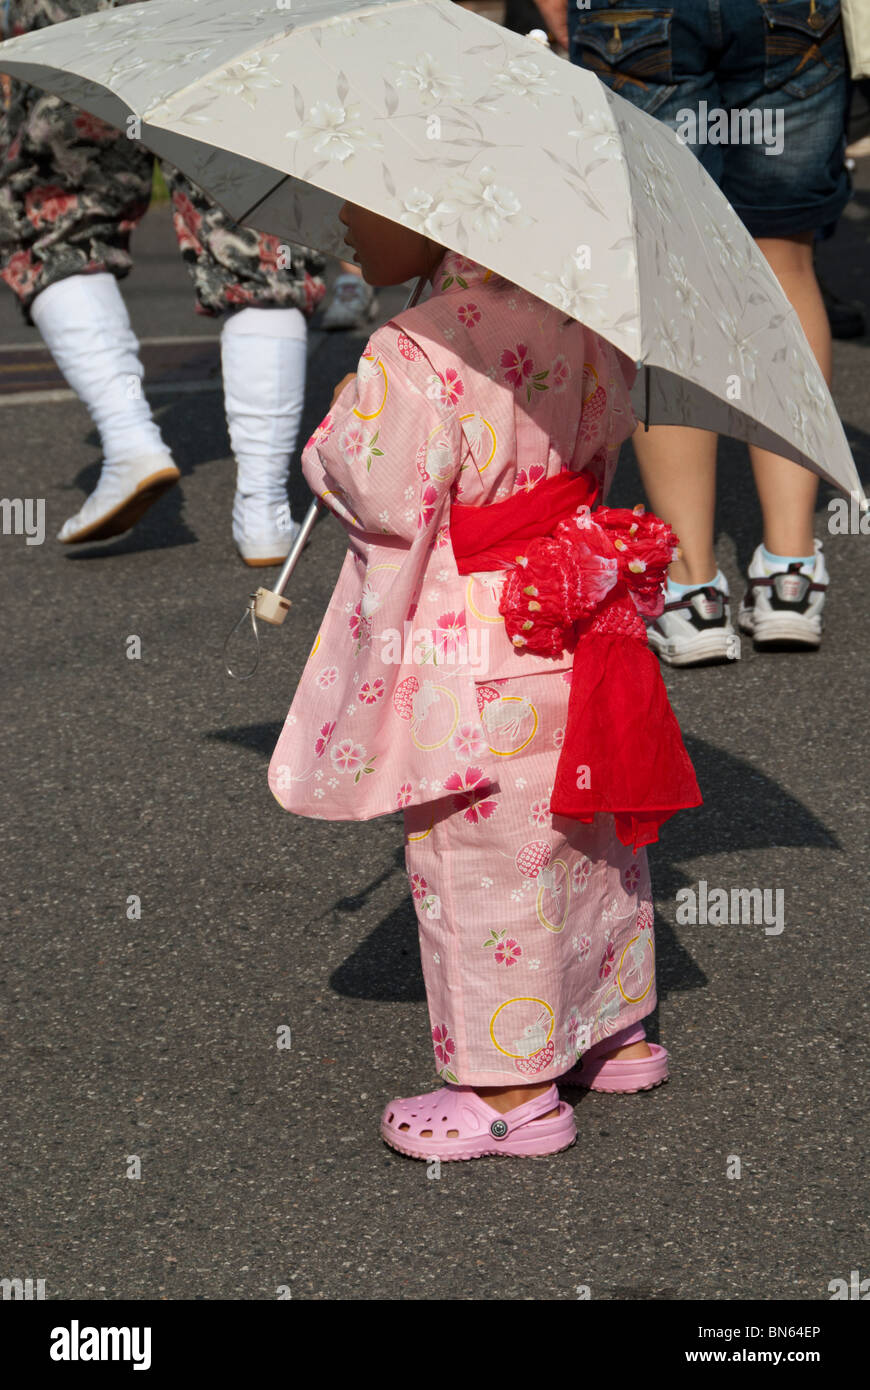 A young Japanese girl wears a pink summer kimono and holds a parasol at a summer festival. Stock Photo